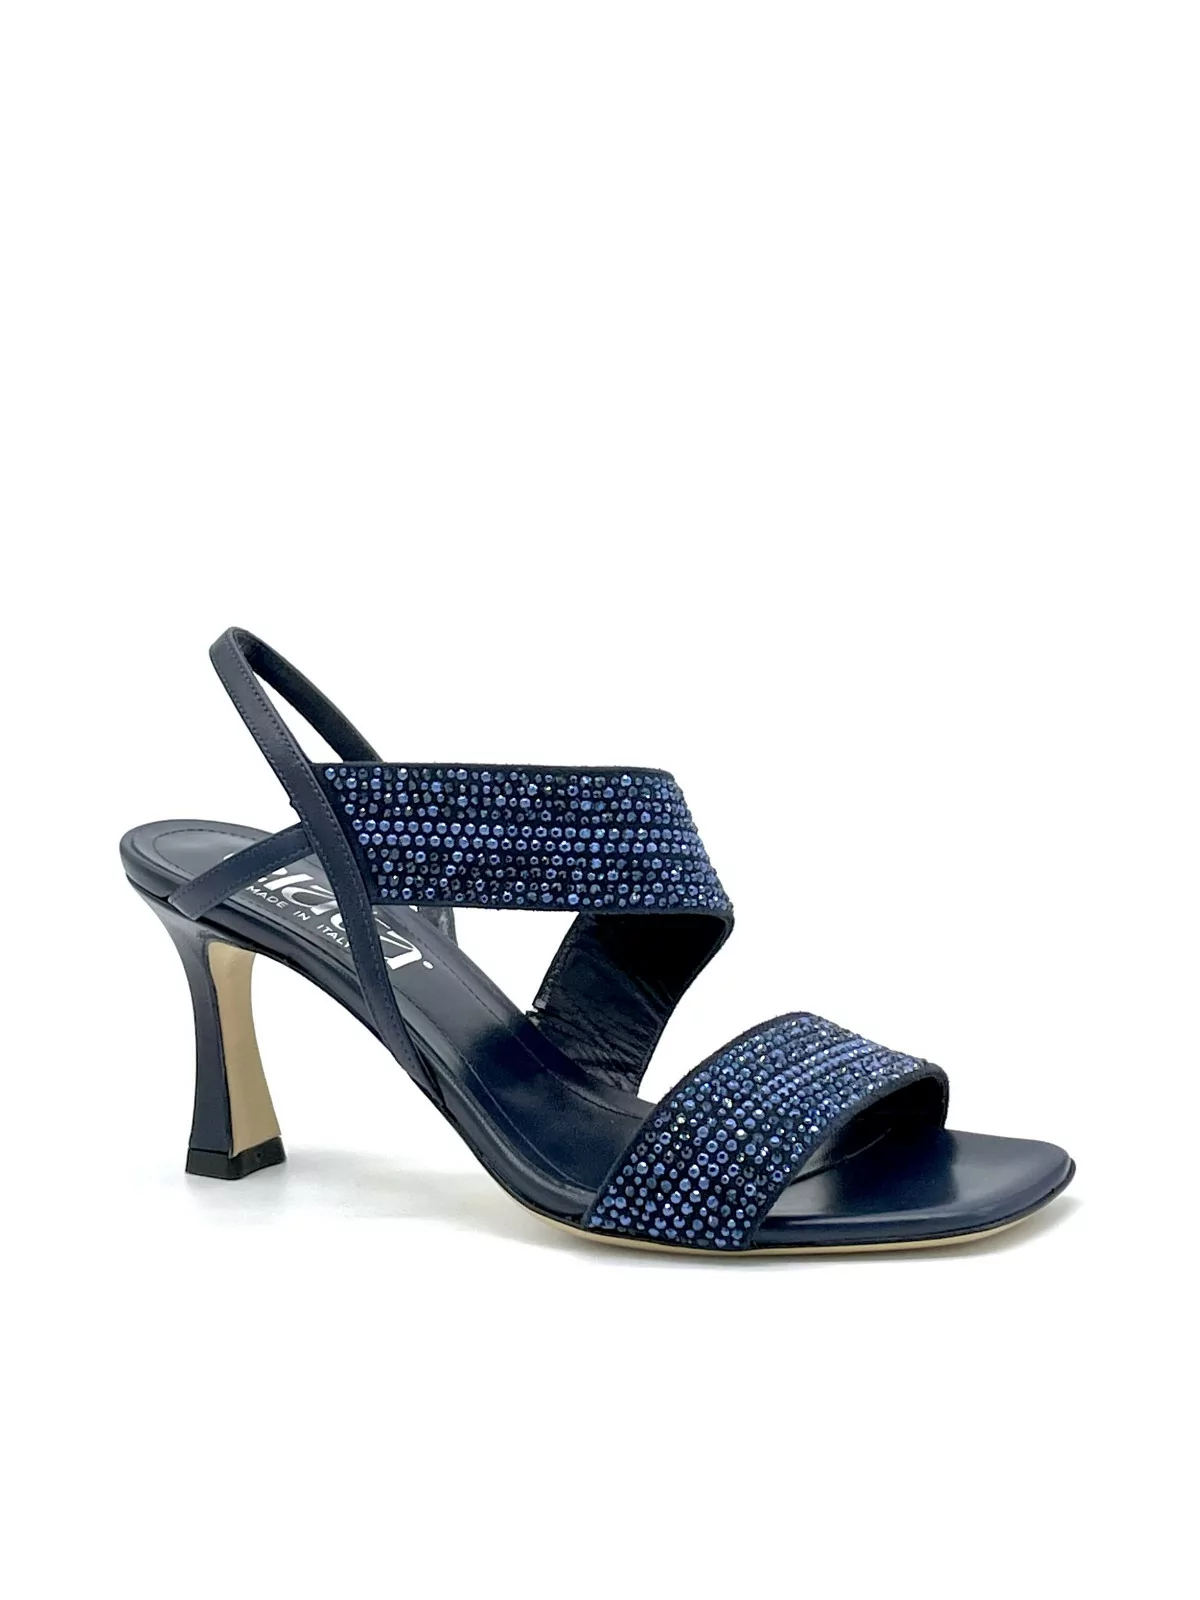 Blue leather sandal with rhinestones. Leather lining, leather sole. 7,5 cm heel.